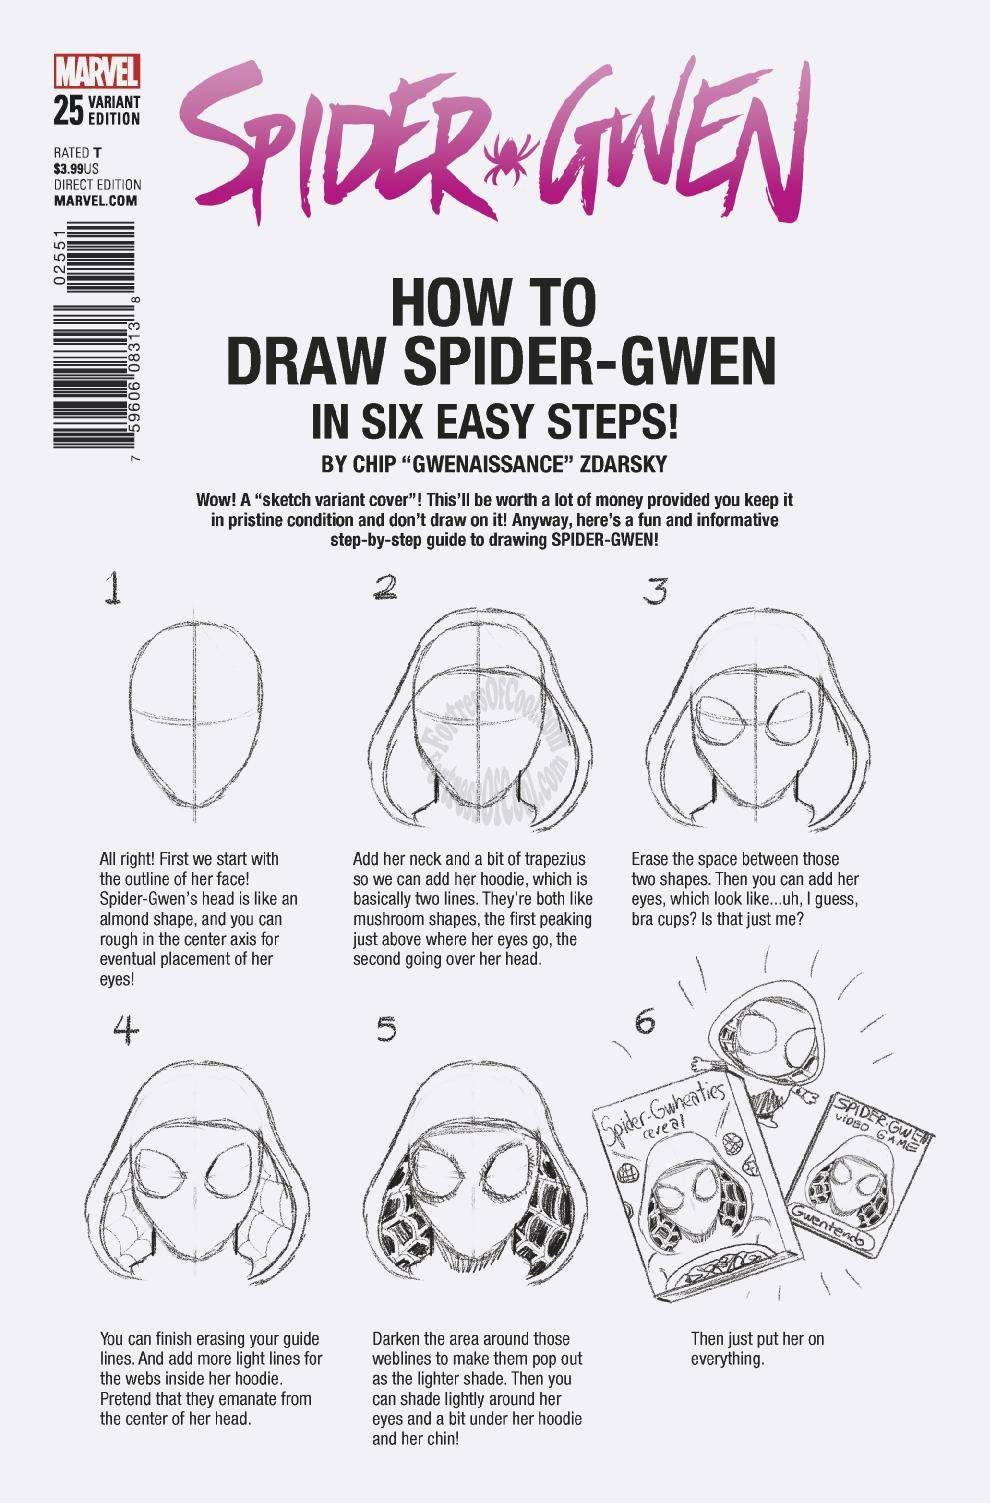 SPIDER-GWEN #25 ZDARSKY HOW TO DRAW VARIANT LEGACY